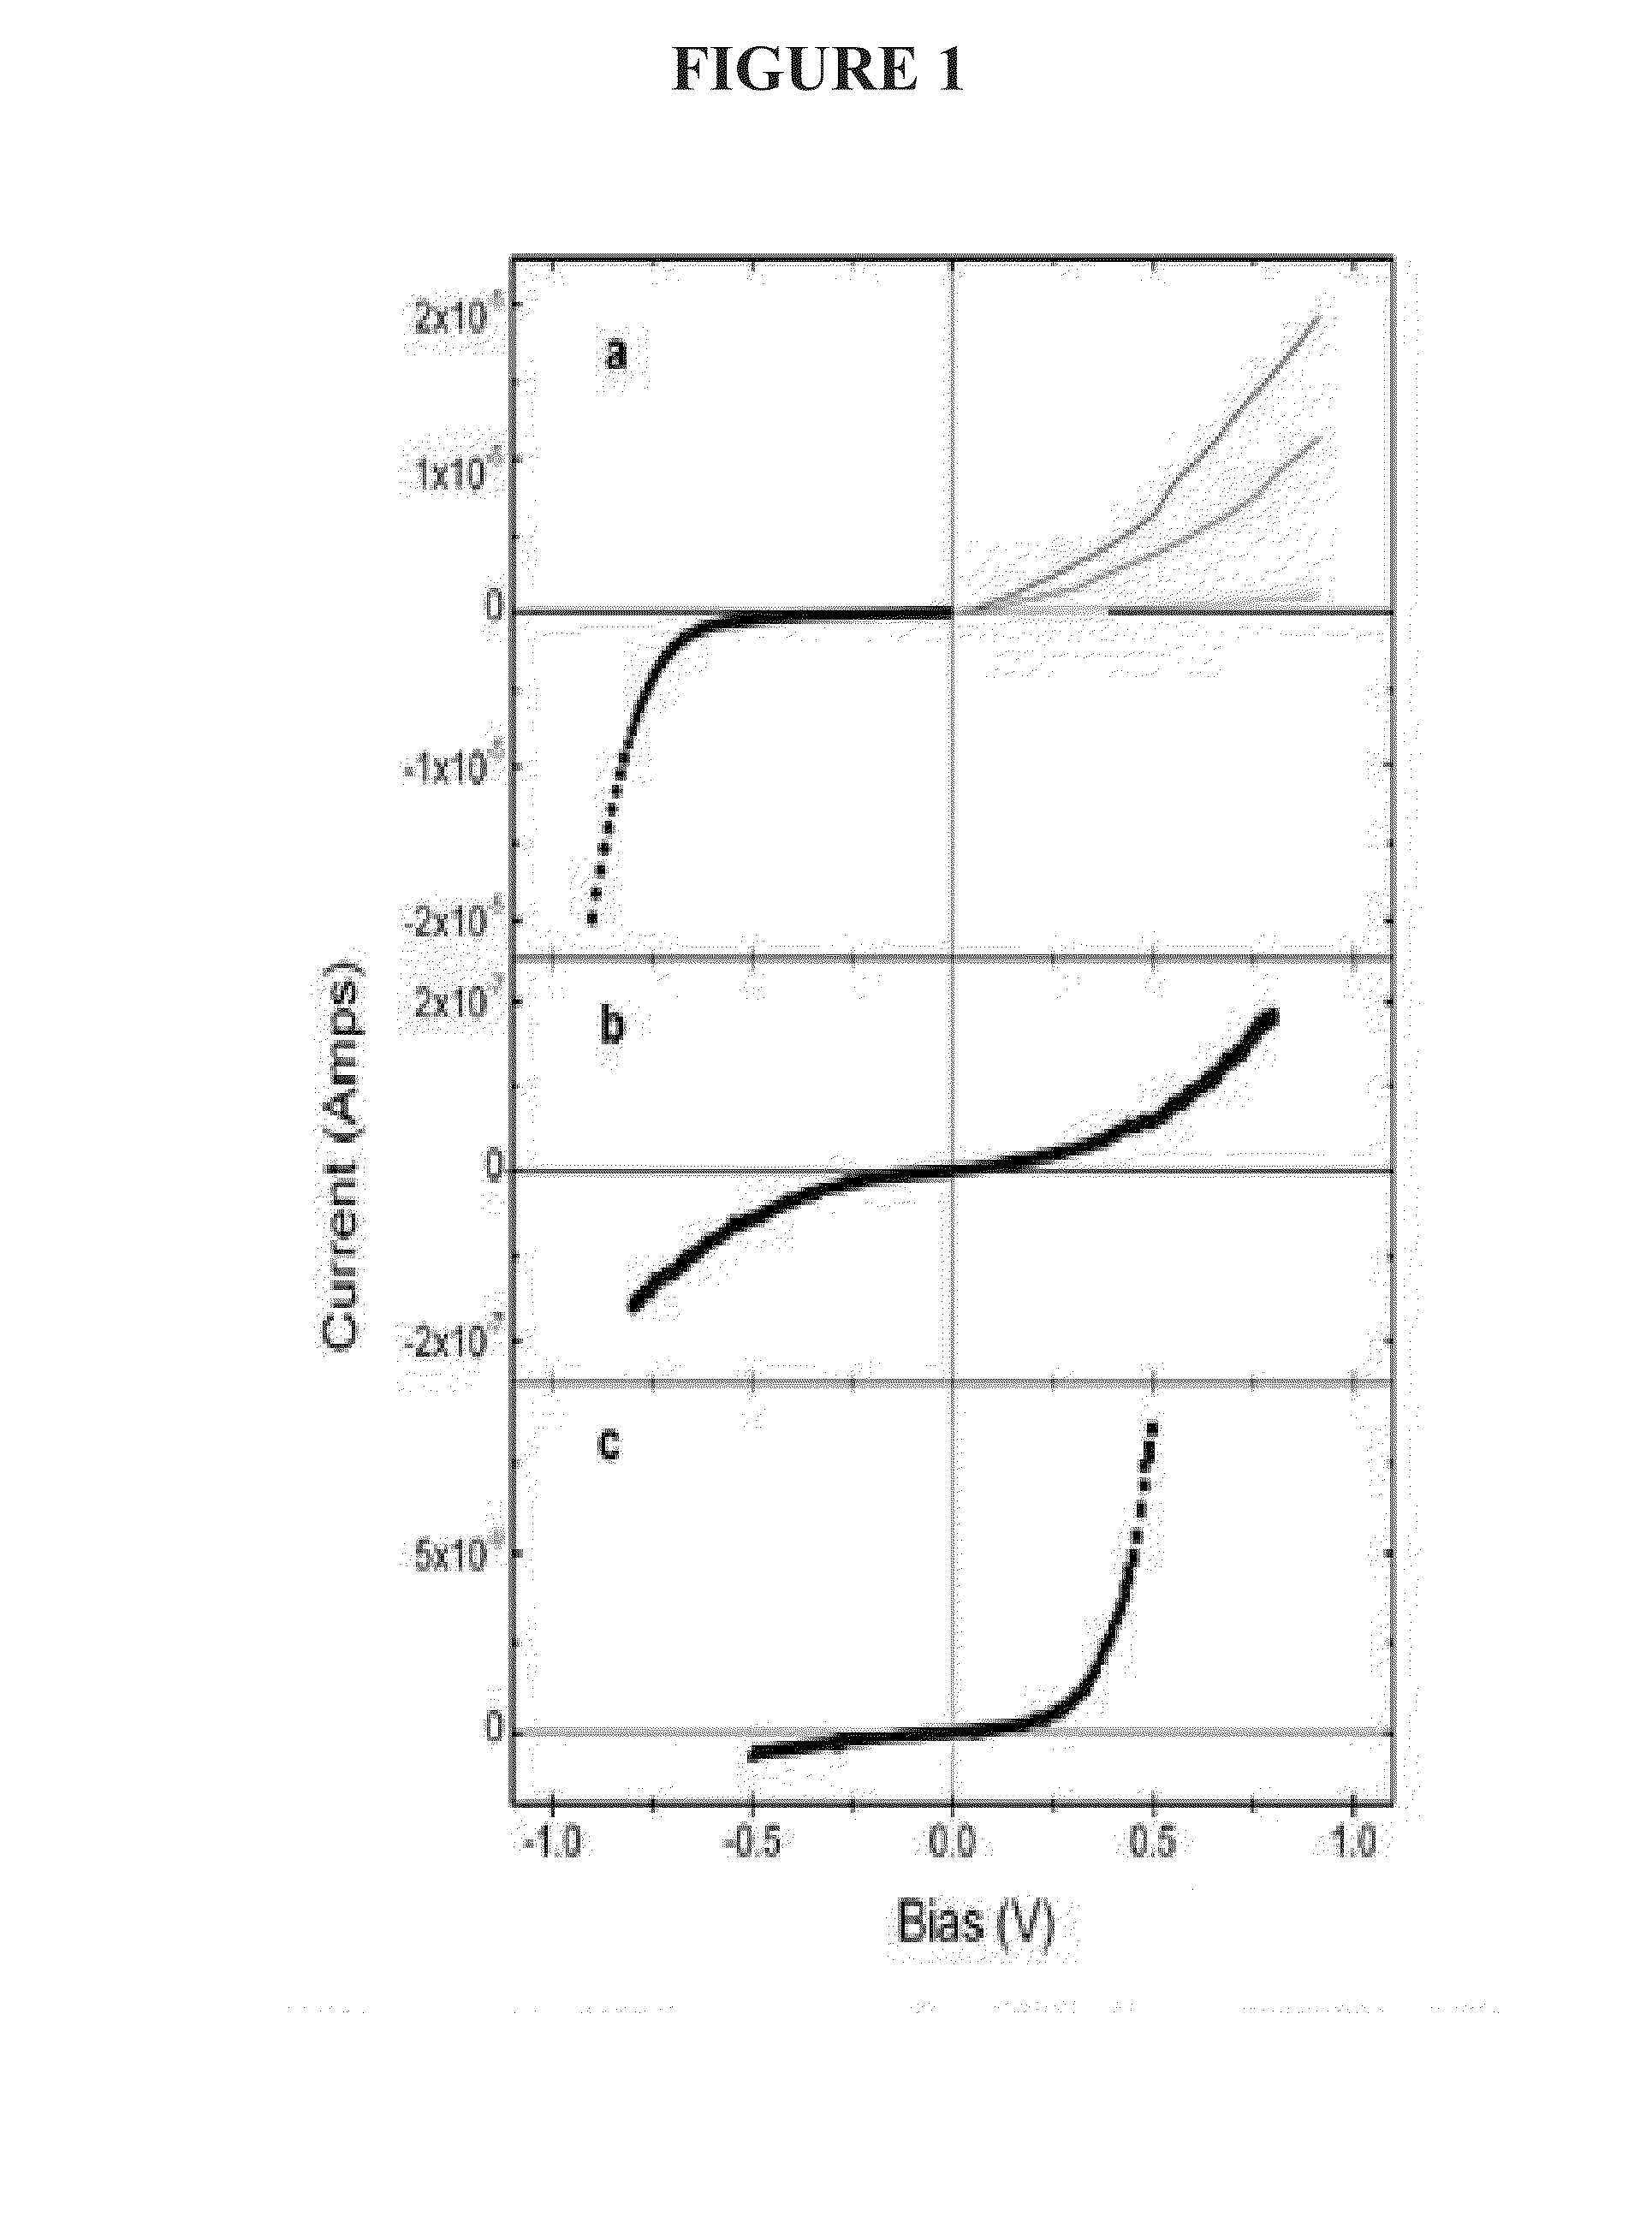 Neutron detection using gd-loaded oxide and nitride heterojunction diodes